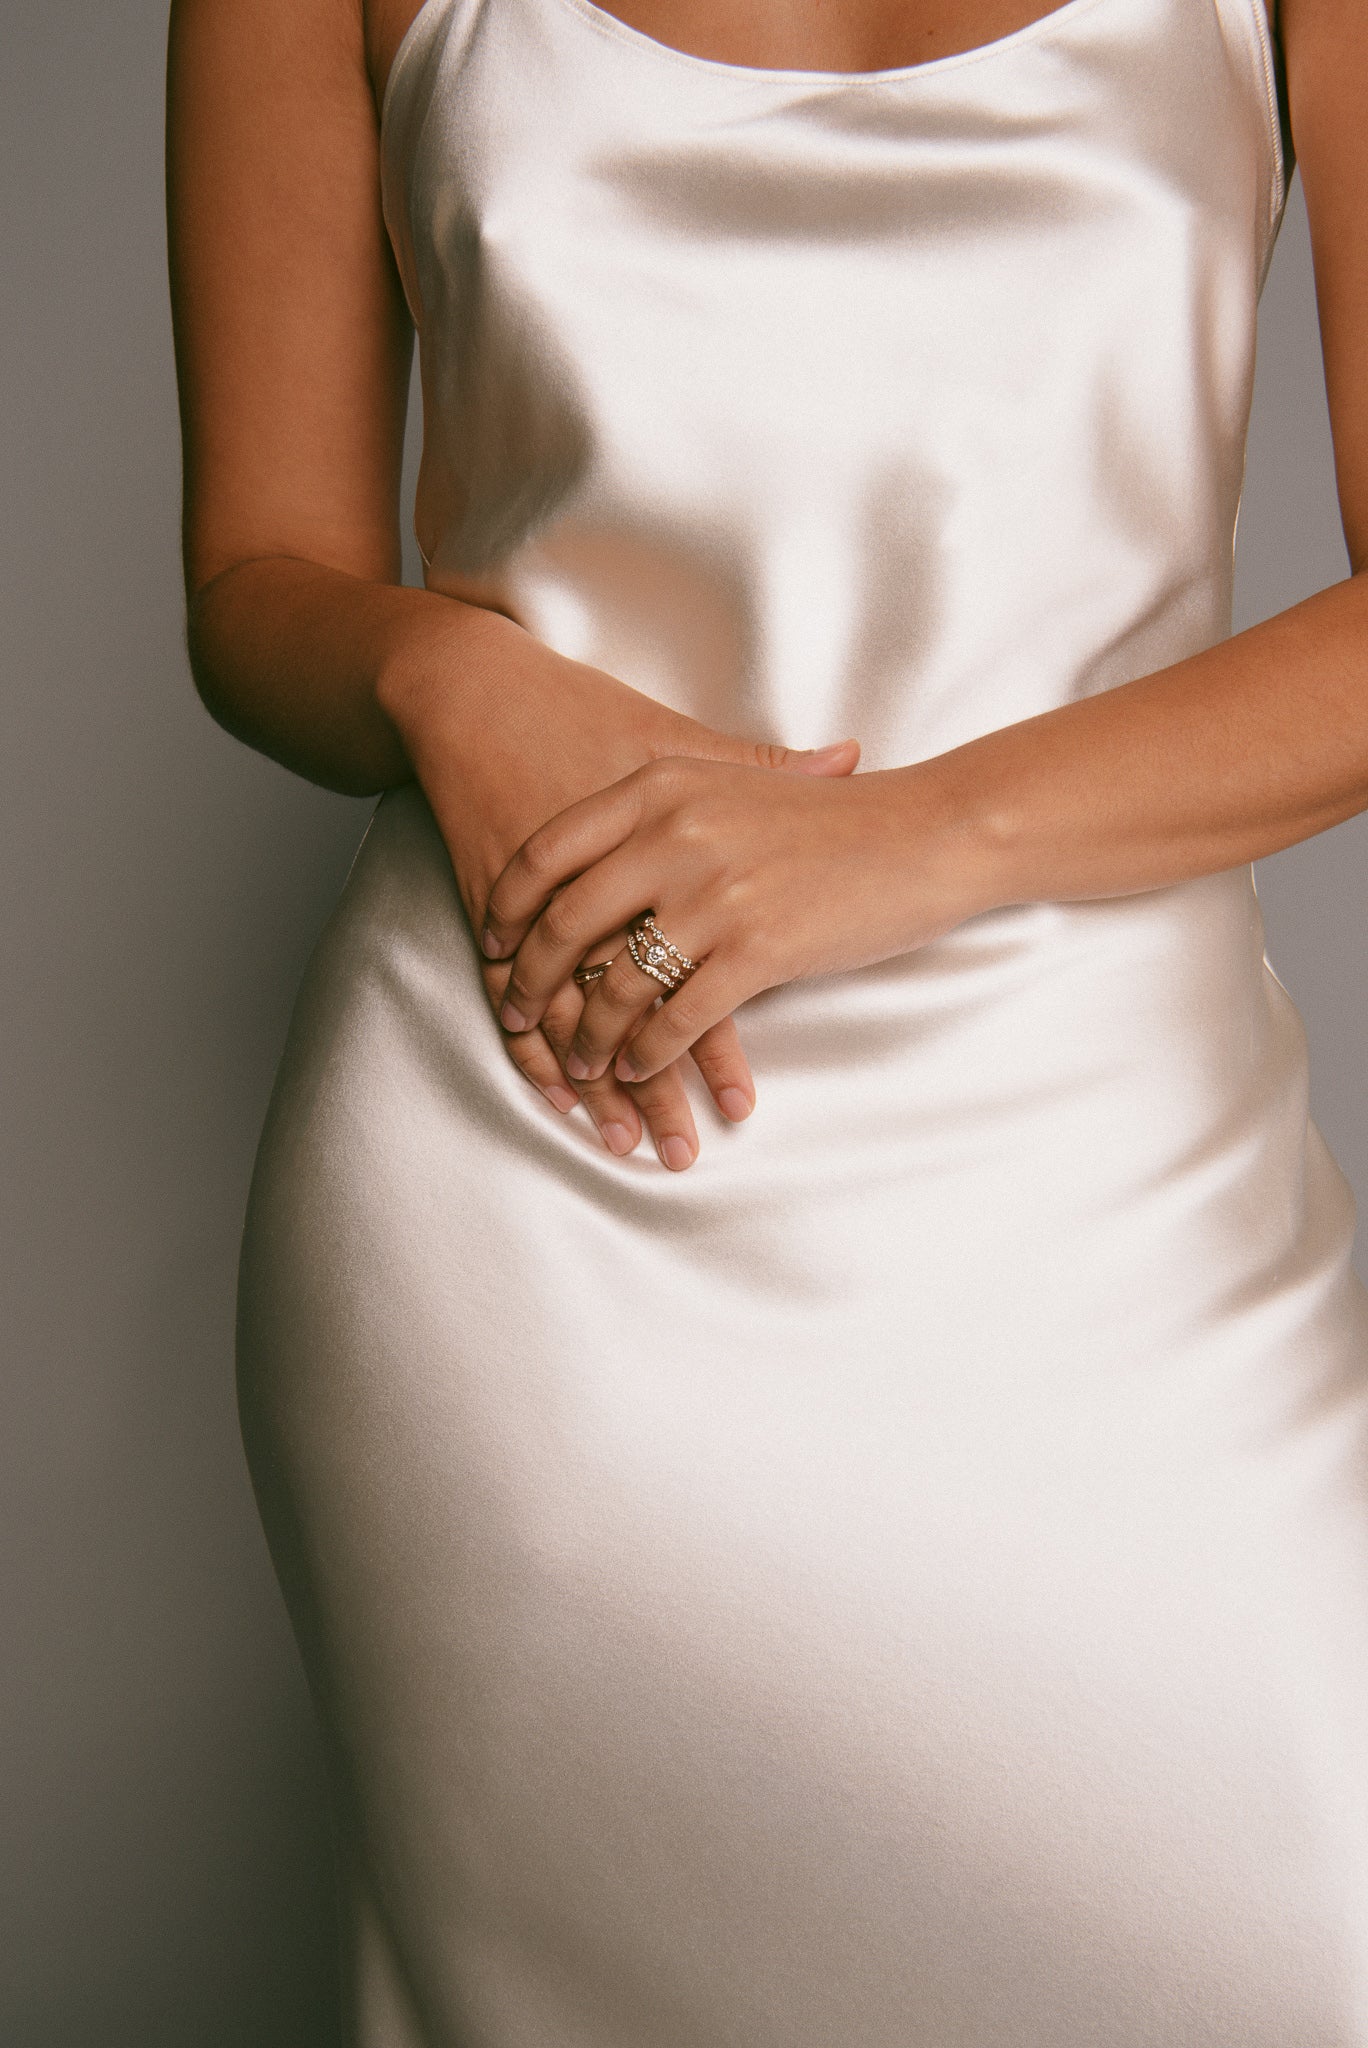 Model in a silk dress, clasping her hands, wearing three bridal-inspired rings.